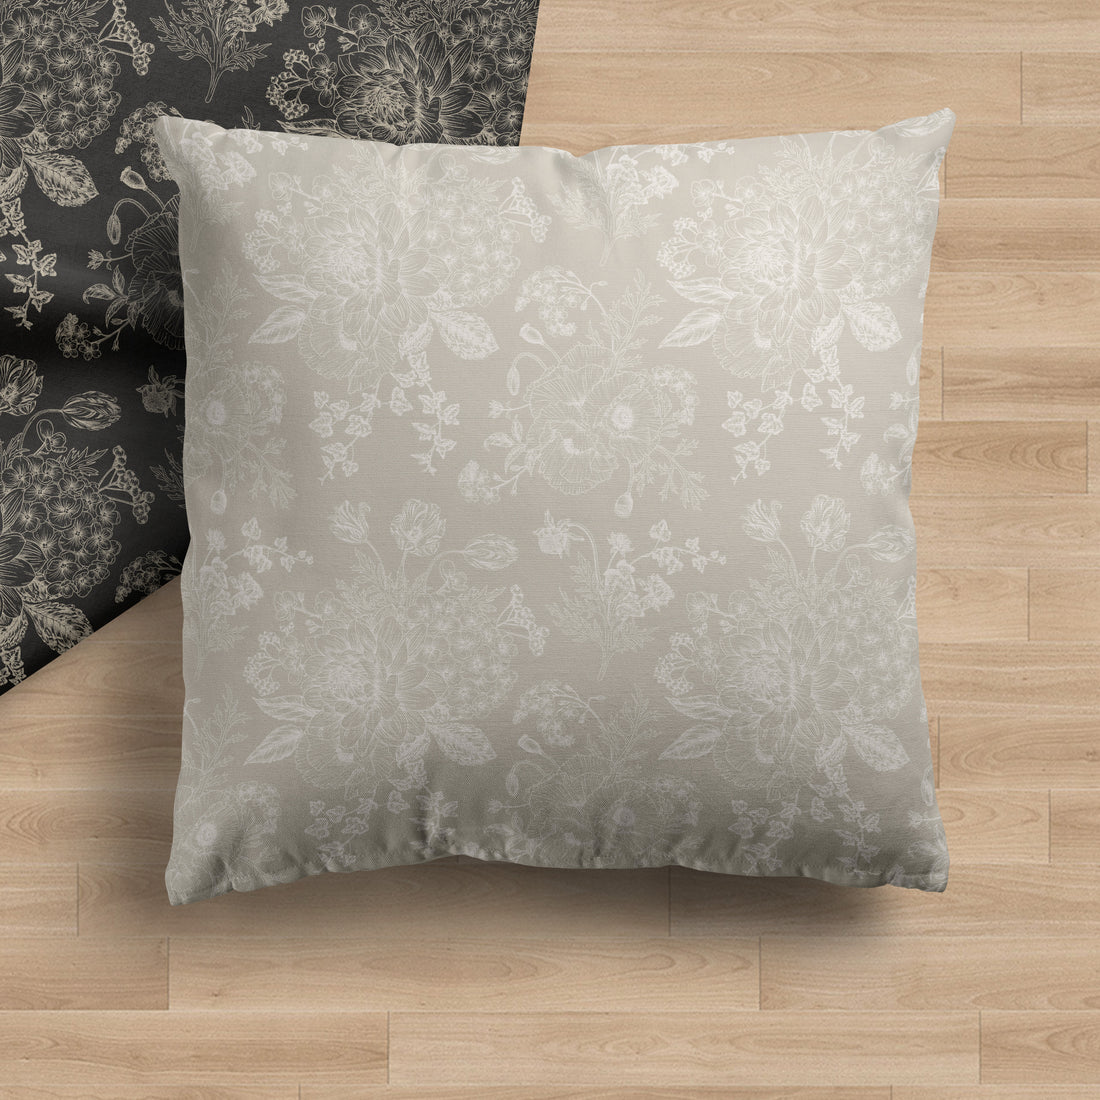 Light Floral Luxe Pillow Cover II